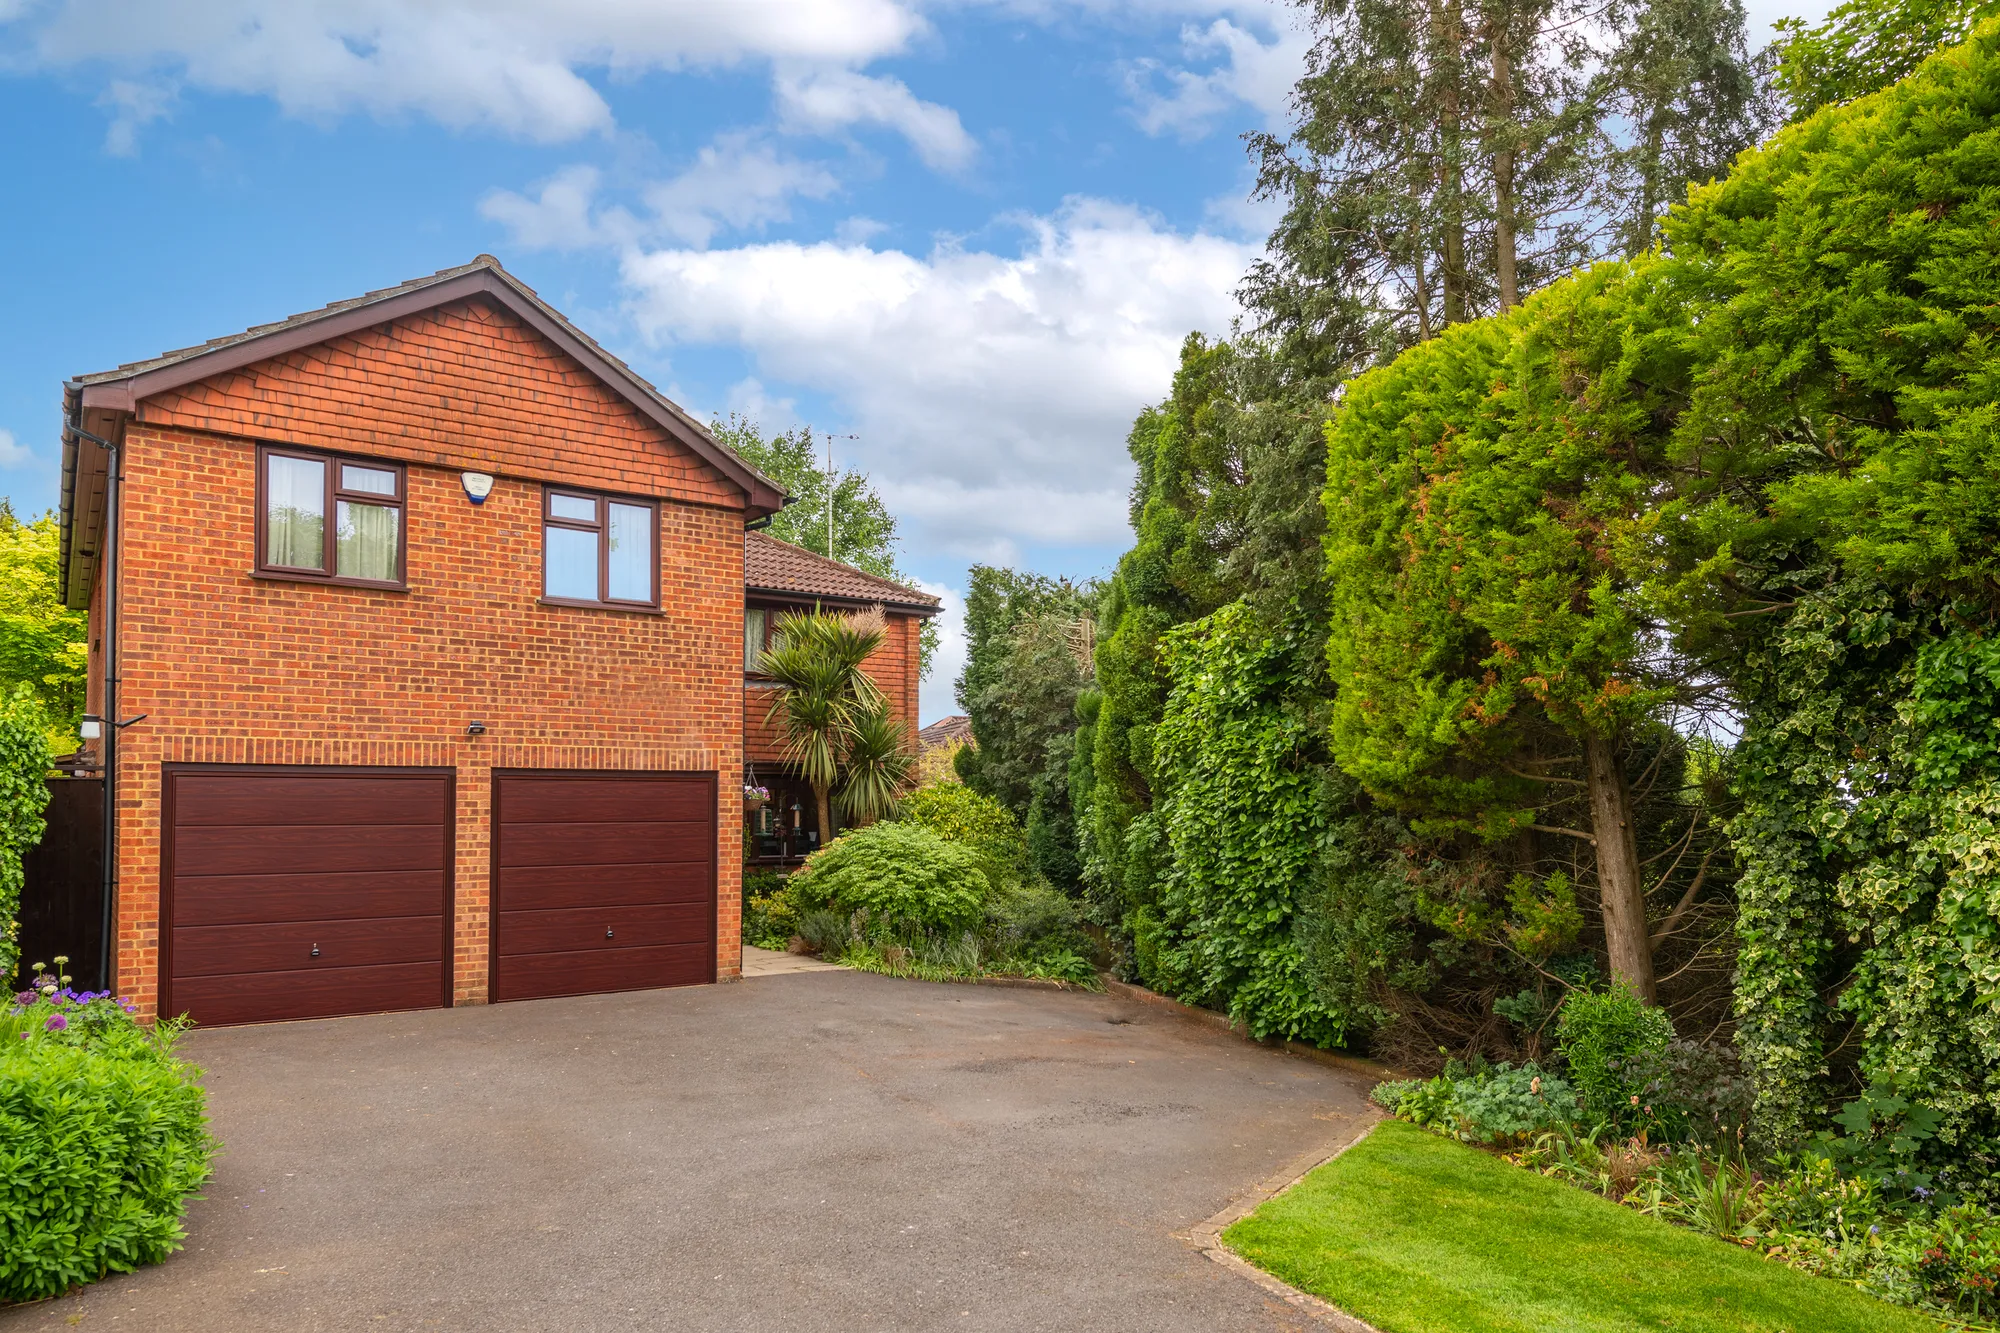 4 bed detached house to rent in Priory Drive, Reigate  - Property Image 1